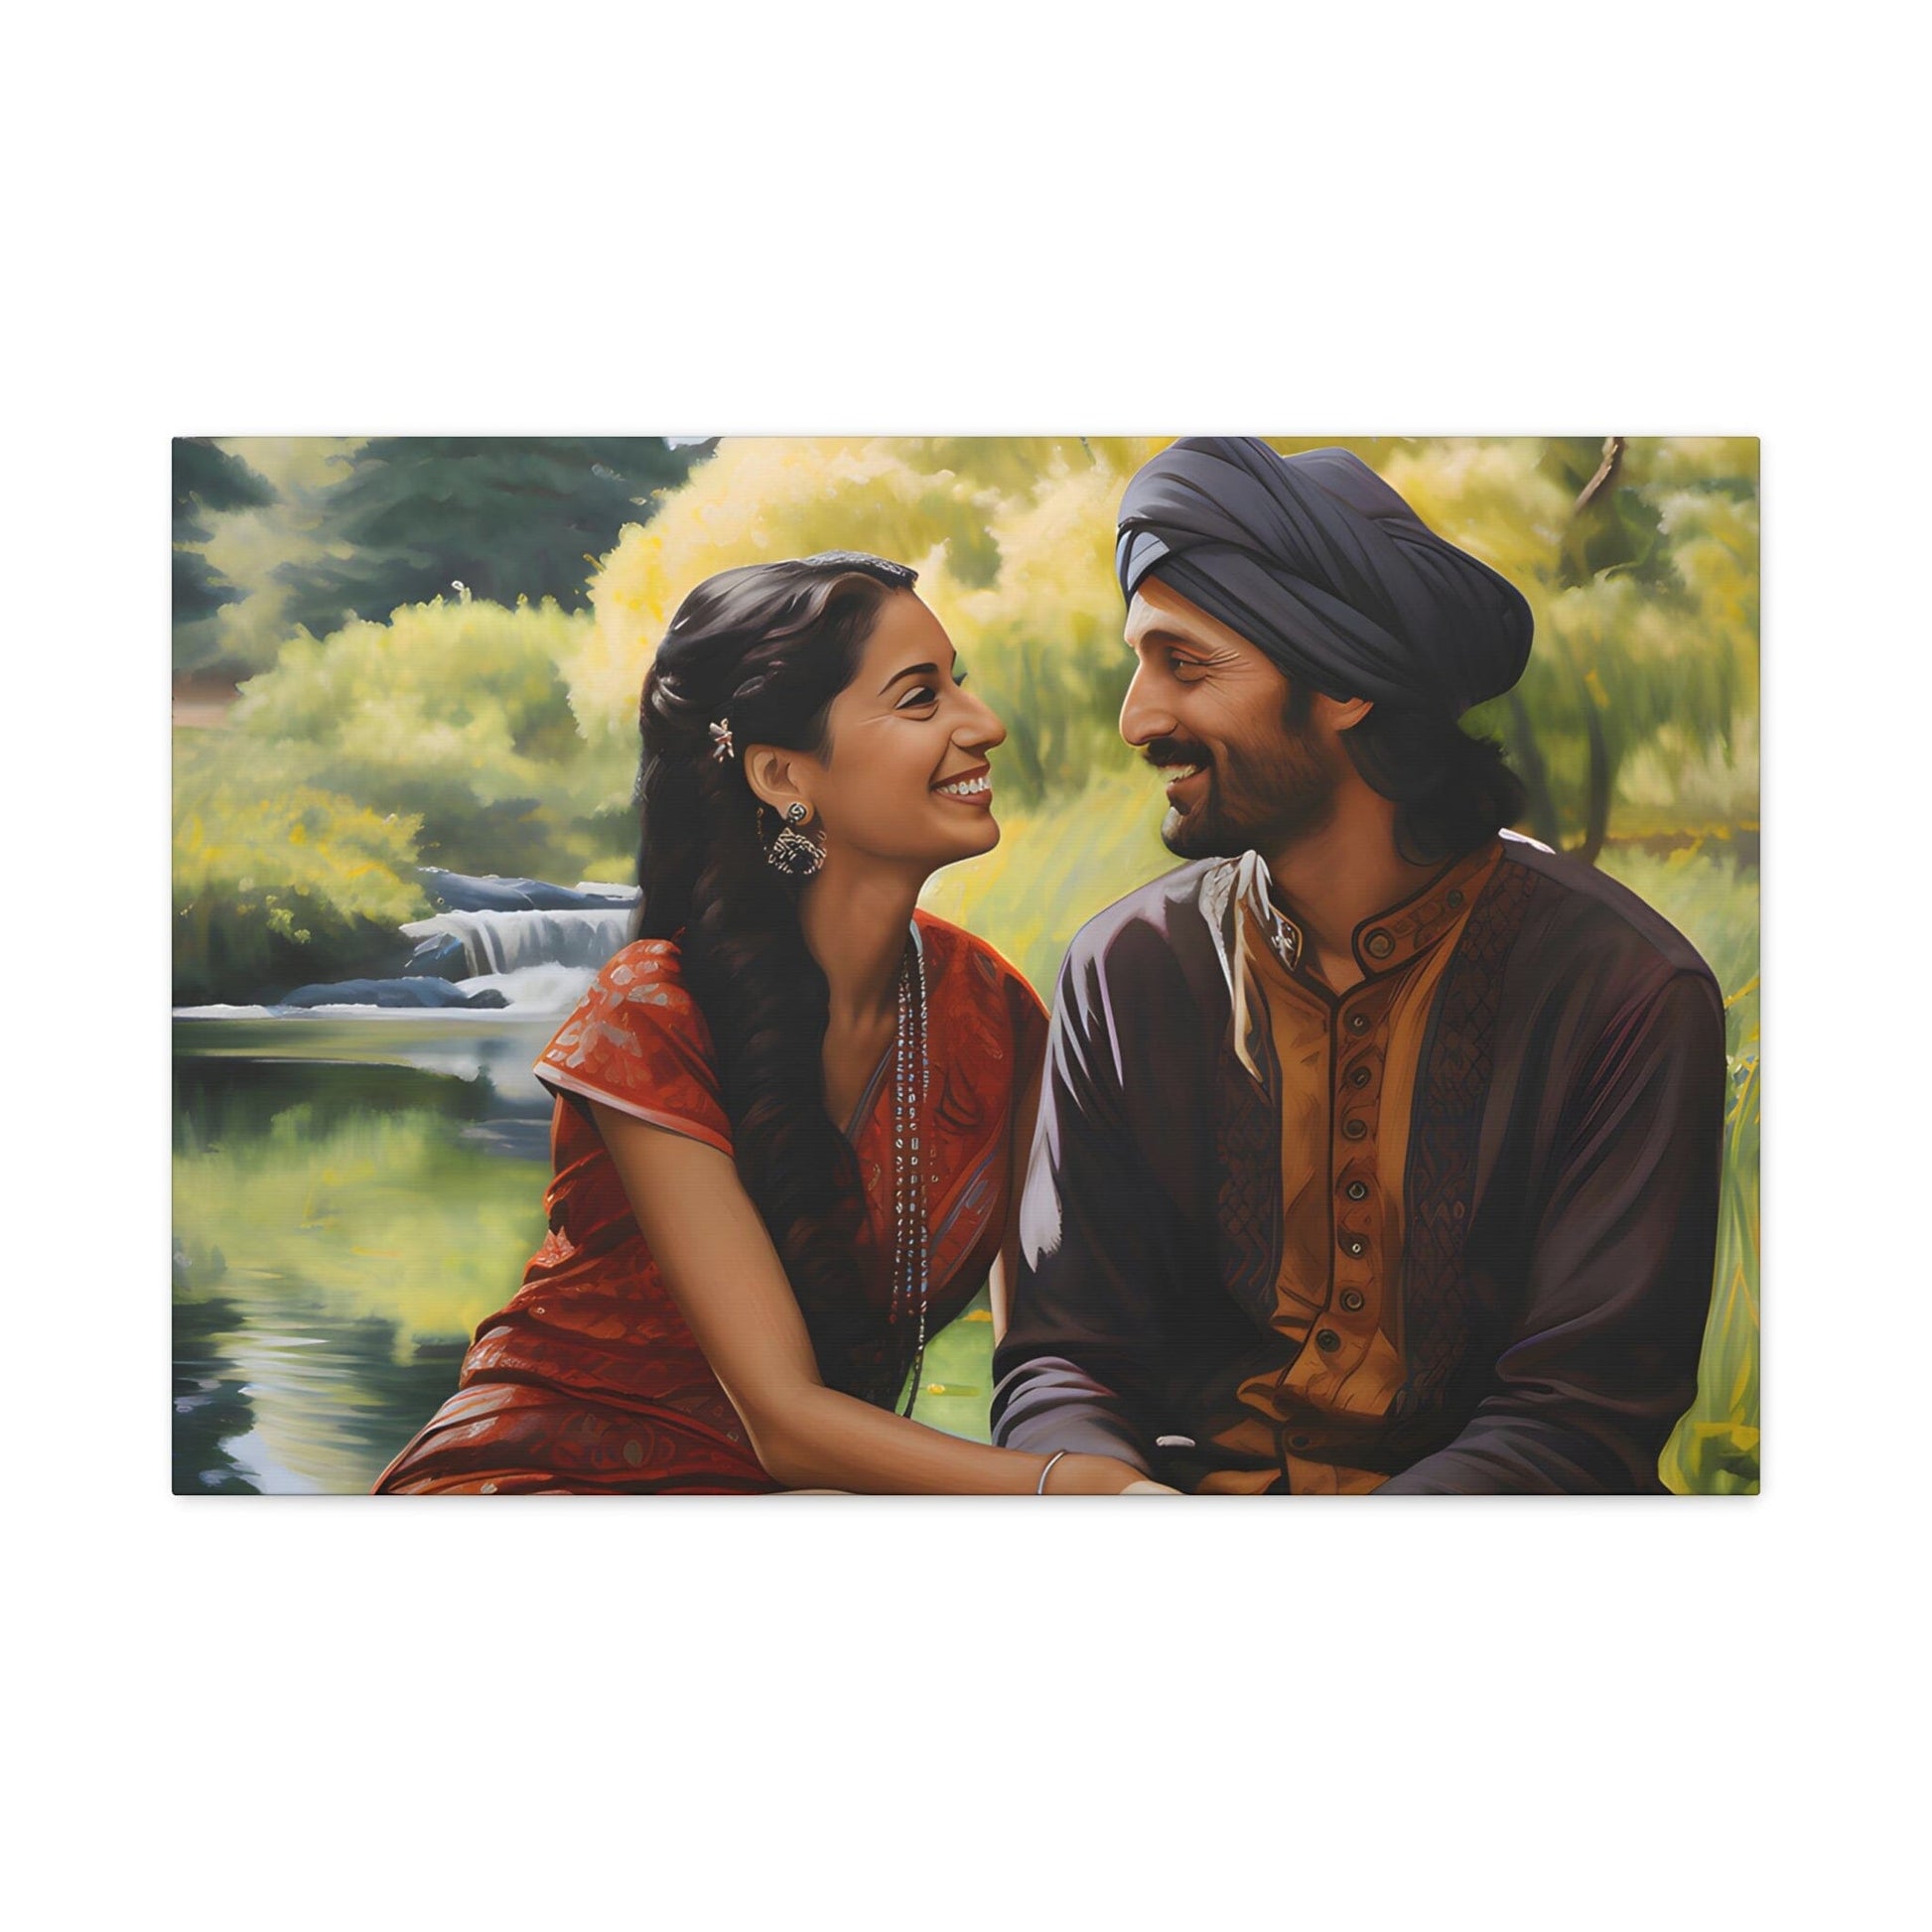 Canvas by Aravind Patel depicting a young Indian couple enjoying a serene moment in a park, surrounded by tall trees and a reflective pond, capturing the essence of romantic serenity.